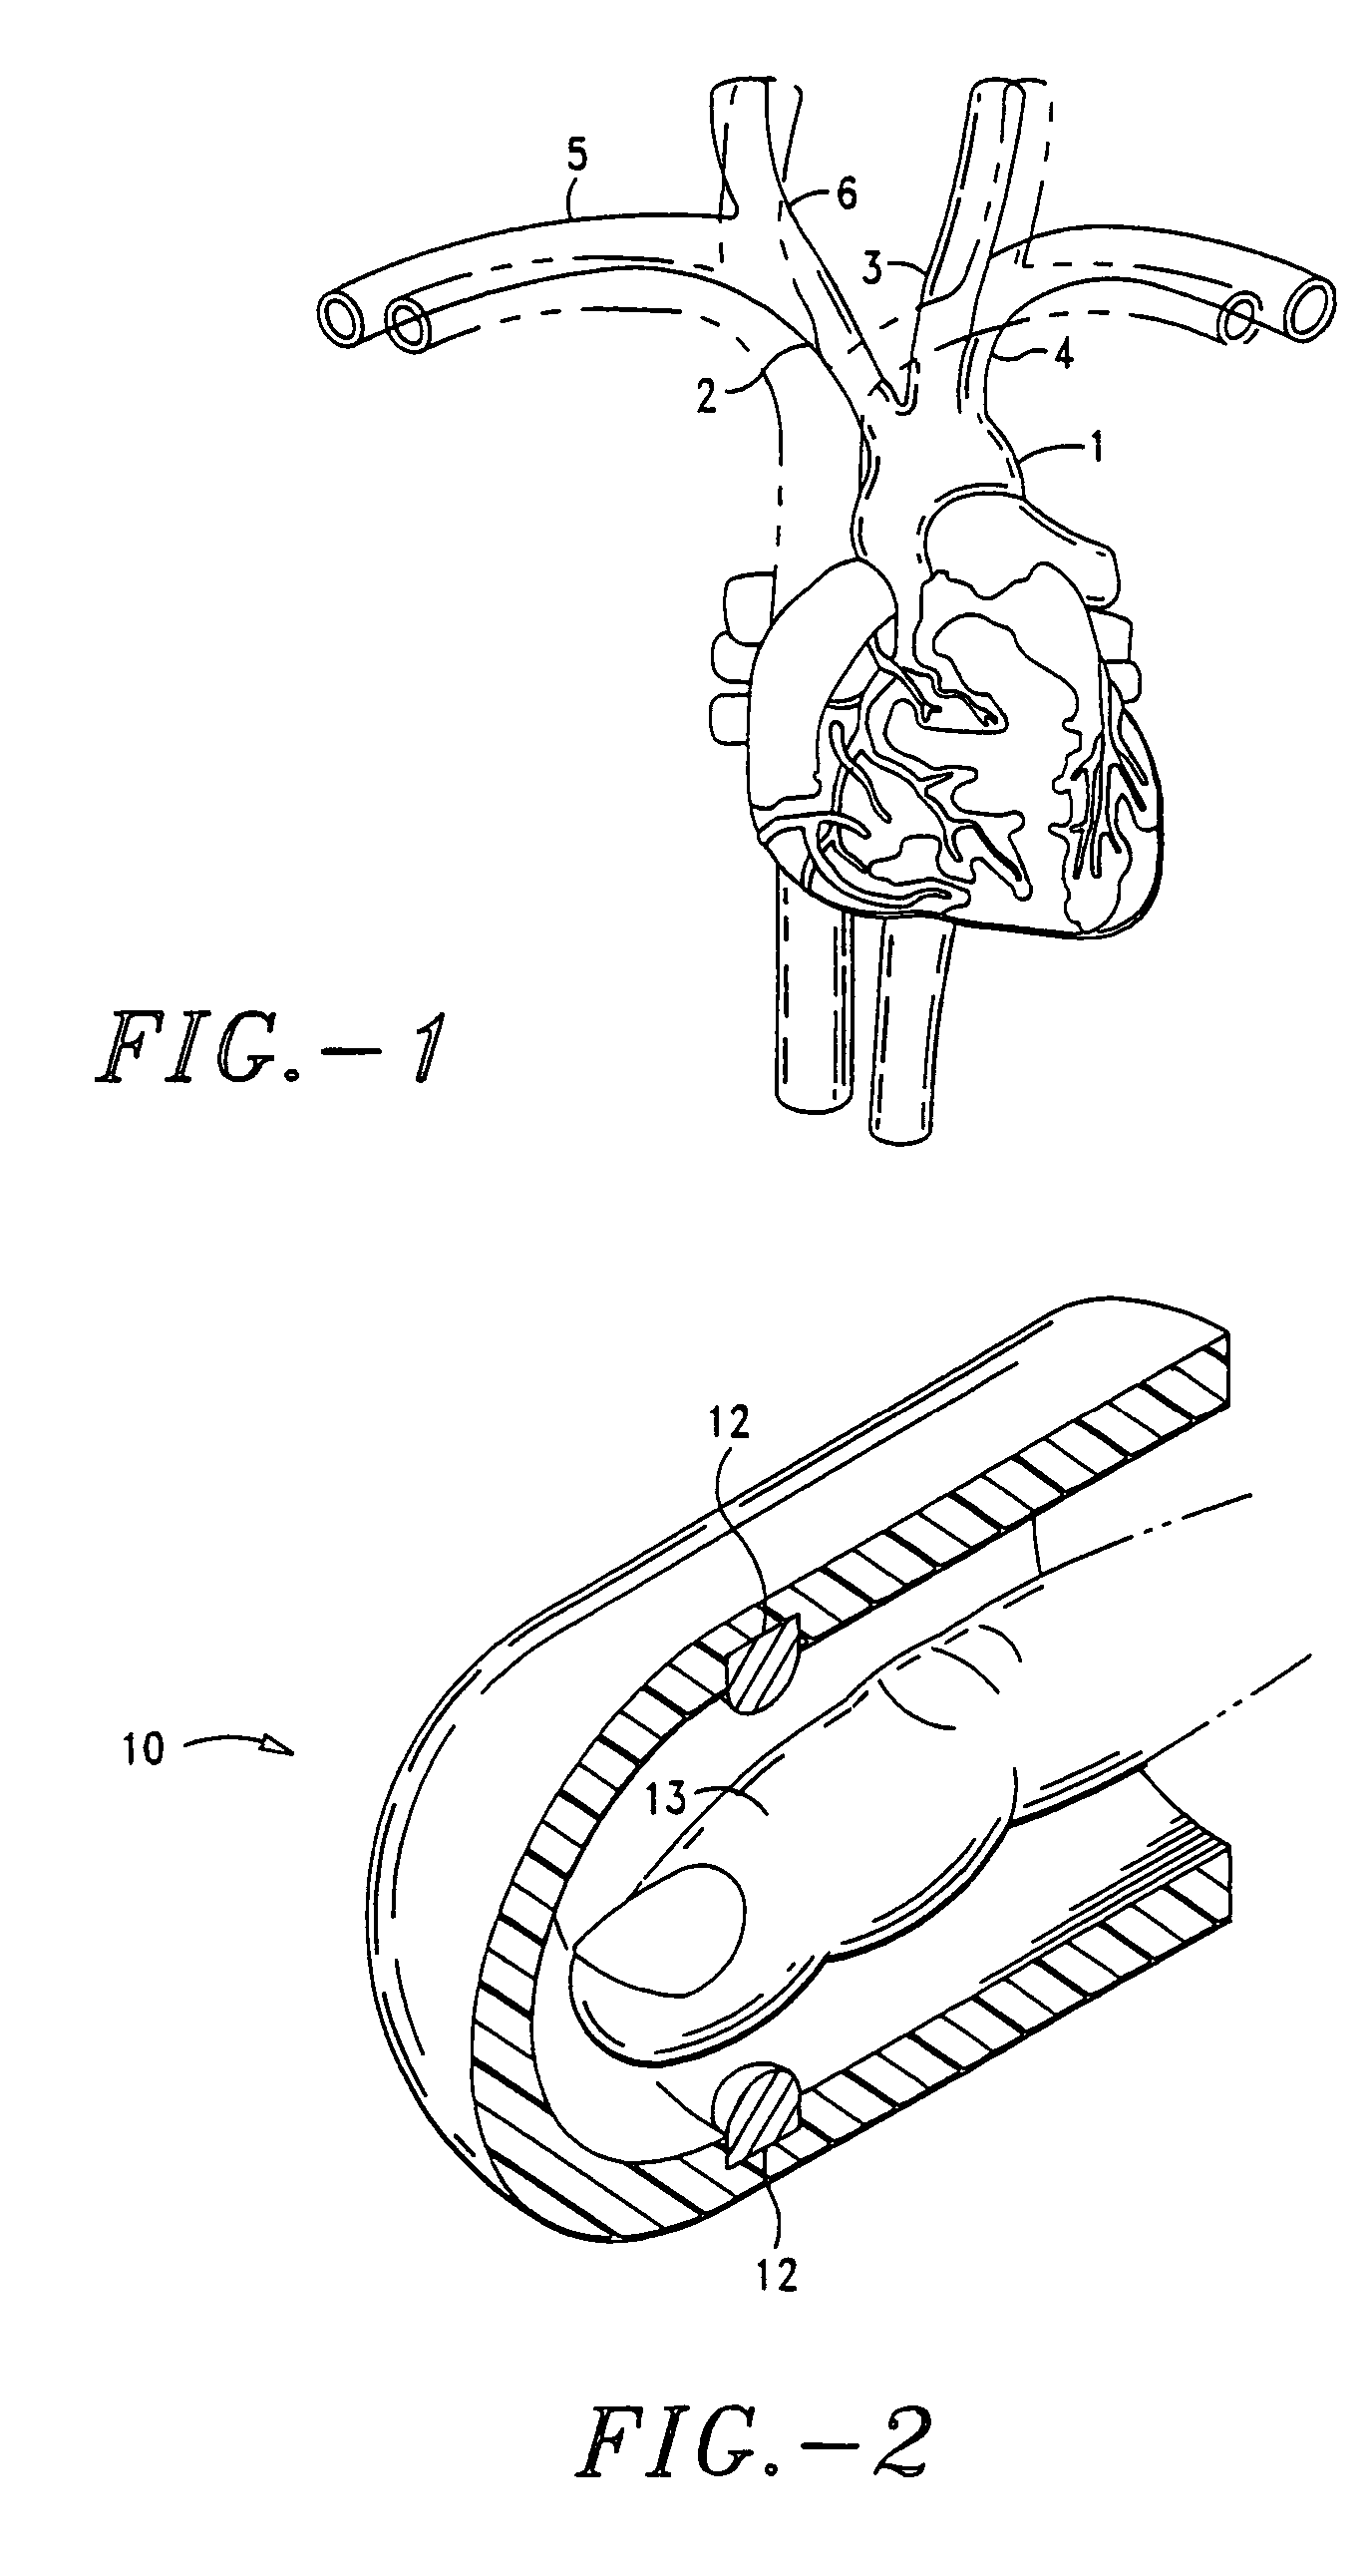 Method for noninvasive continuous determination of physiologic characteristics